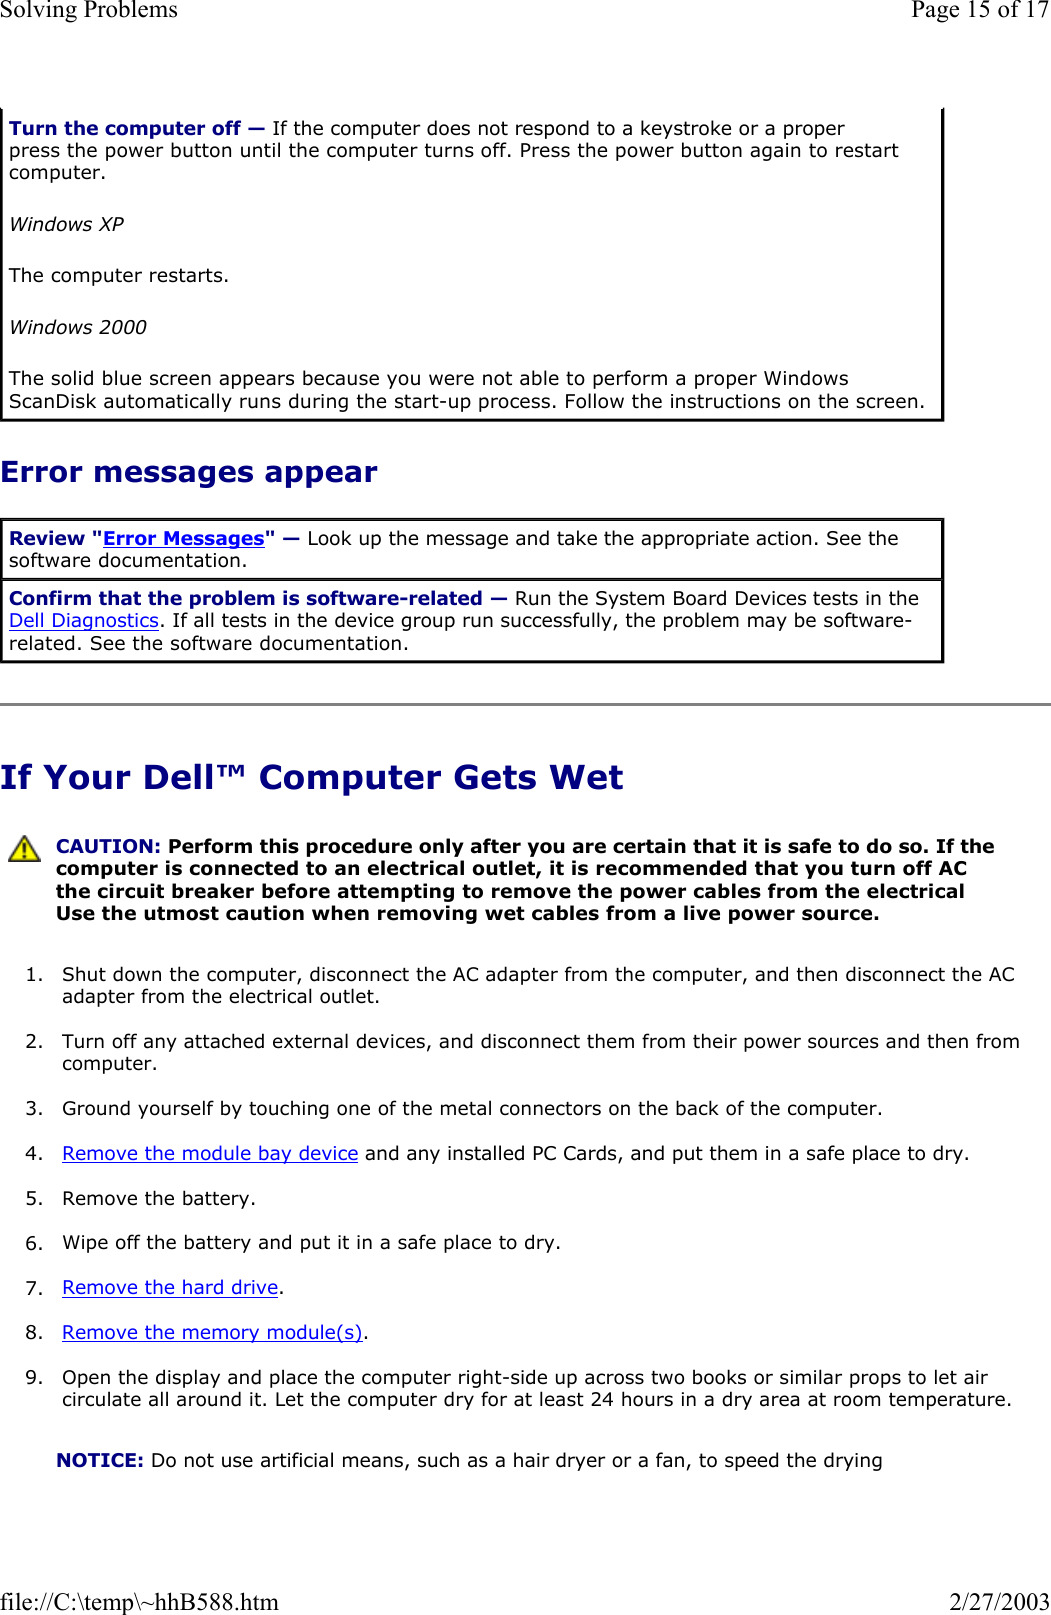 Error messages appear If Your Dell™ Computer Gets Wet 1. Shut down the computer, disconnect the AC adapter from the computer, and then disconnect the AC adapter from the electrical outlet.  2. Turn off any attached external devices, and disconnect them from their power sources and then from computer.  3. Ground yourself by touching one of the metal connectors on the back of the computer.  4. Remove the module bay device and any installed PC Cards, and put them in a safe place to dry.  5. Remove the battery.  6. Wipe off the battery and put it in a safe place to dry.  7. Remove the hard drive.  8. Remove the memory module(s).  9. Open the display and place the computer right-side up across two books or similar props to let air circulate all around it. Let the computer dry for at least 24 hours in a dry area at room temperature.  Turn the computer off — If the computer does not respond to a keystroke or a proper press the power button until the computer turns off. Press the power button again to restart computer.  Windows XP The computer restarts. Windows 2000 The solid blue screen appears because you were not able to perform a proper Windows ScanDisk automatically runs during the start-up process. Follow the instructions on the screen. Review &quot;Error Messages&quot; — Look up the message and take the appropriate action. See the software documentation. Confirm that the problem is software-related — Run the System Board Devices tests in the Dell Diagnostics. If all tests in the device group run successfully, the problem may be software-related. See the software documentation.  CAUTION: Perform this procedure only after you are certain that it is safe to do so. If the computer is connected to an electrical outlet, it is recommended that you turn off AC the circuit breaker before attempting to remove the power cables from the electrical Use the utmost caution when removing wet cables from a live power source.NOTICE: Do not use artificial means, such as a hair dryer or a fan, to speed the drying Page 15 of 17Solving Problems2/27/2003file://C:\temp\~hhB588.htm